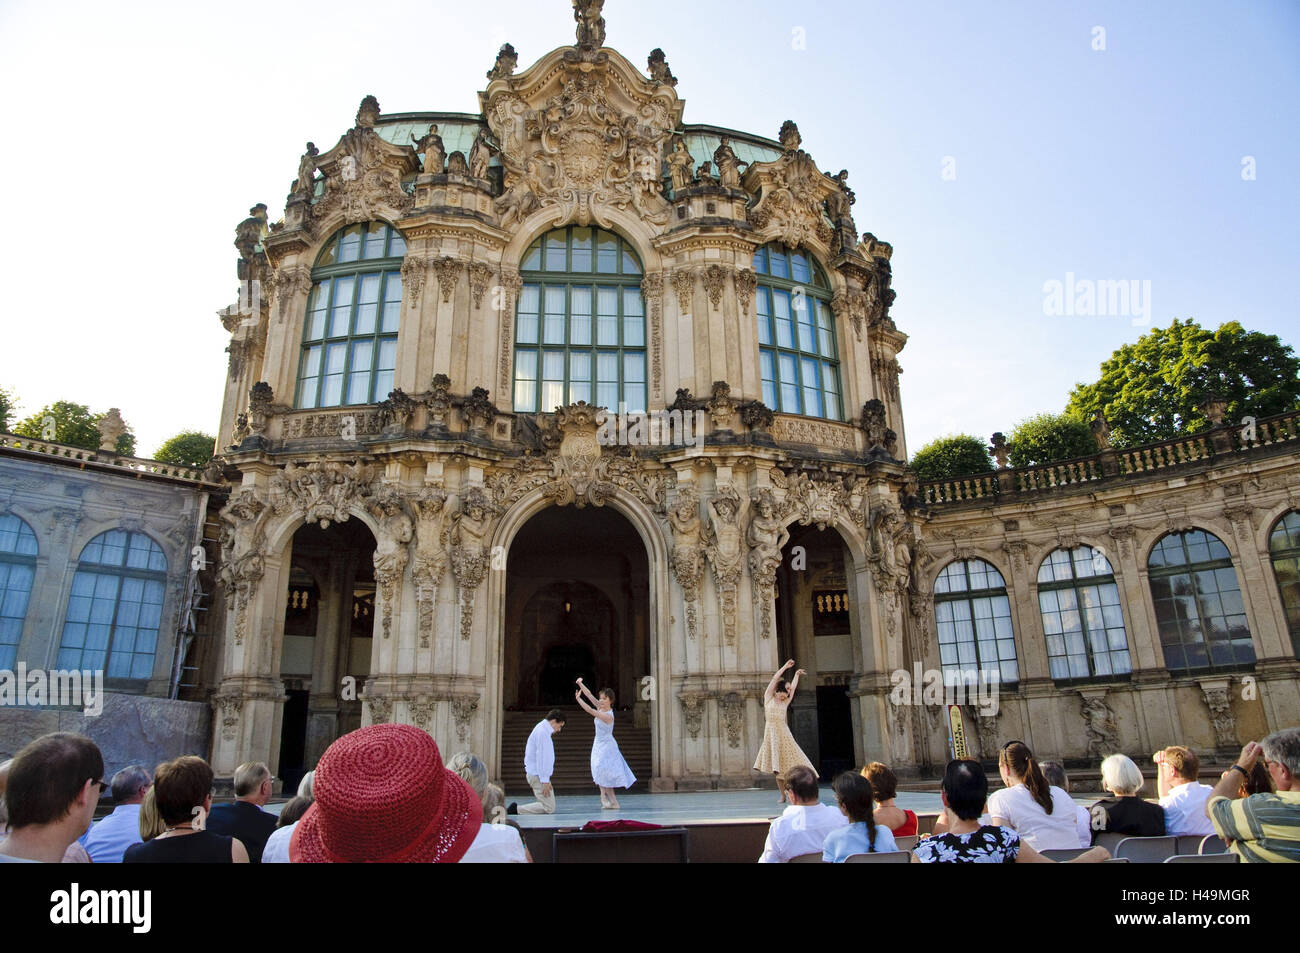 Dresden Zwinger, Zwinger concerts, ballet in front of the Wallpavillon, Dresden, Saxony, Germany, Stock Photo